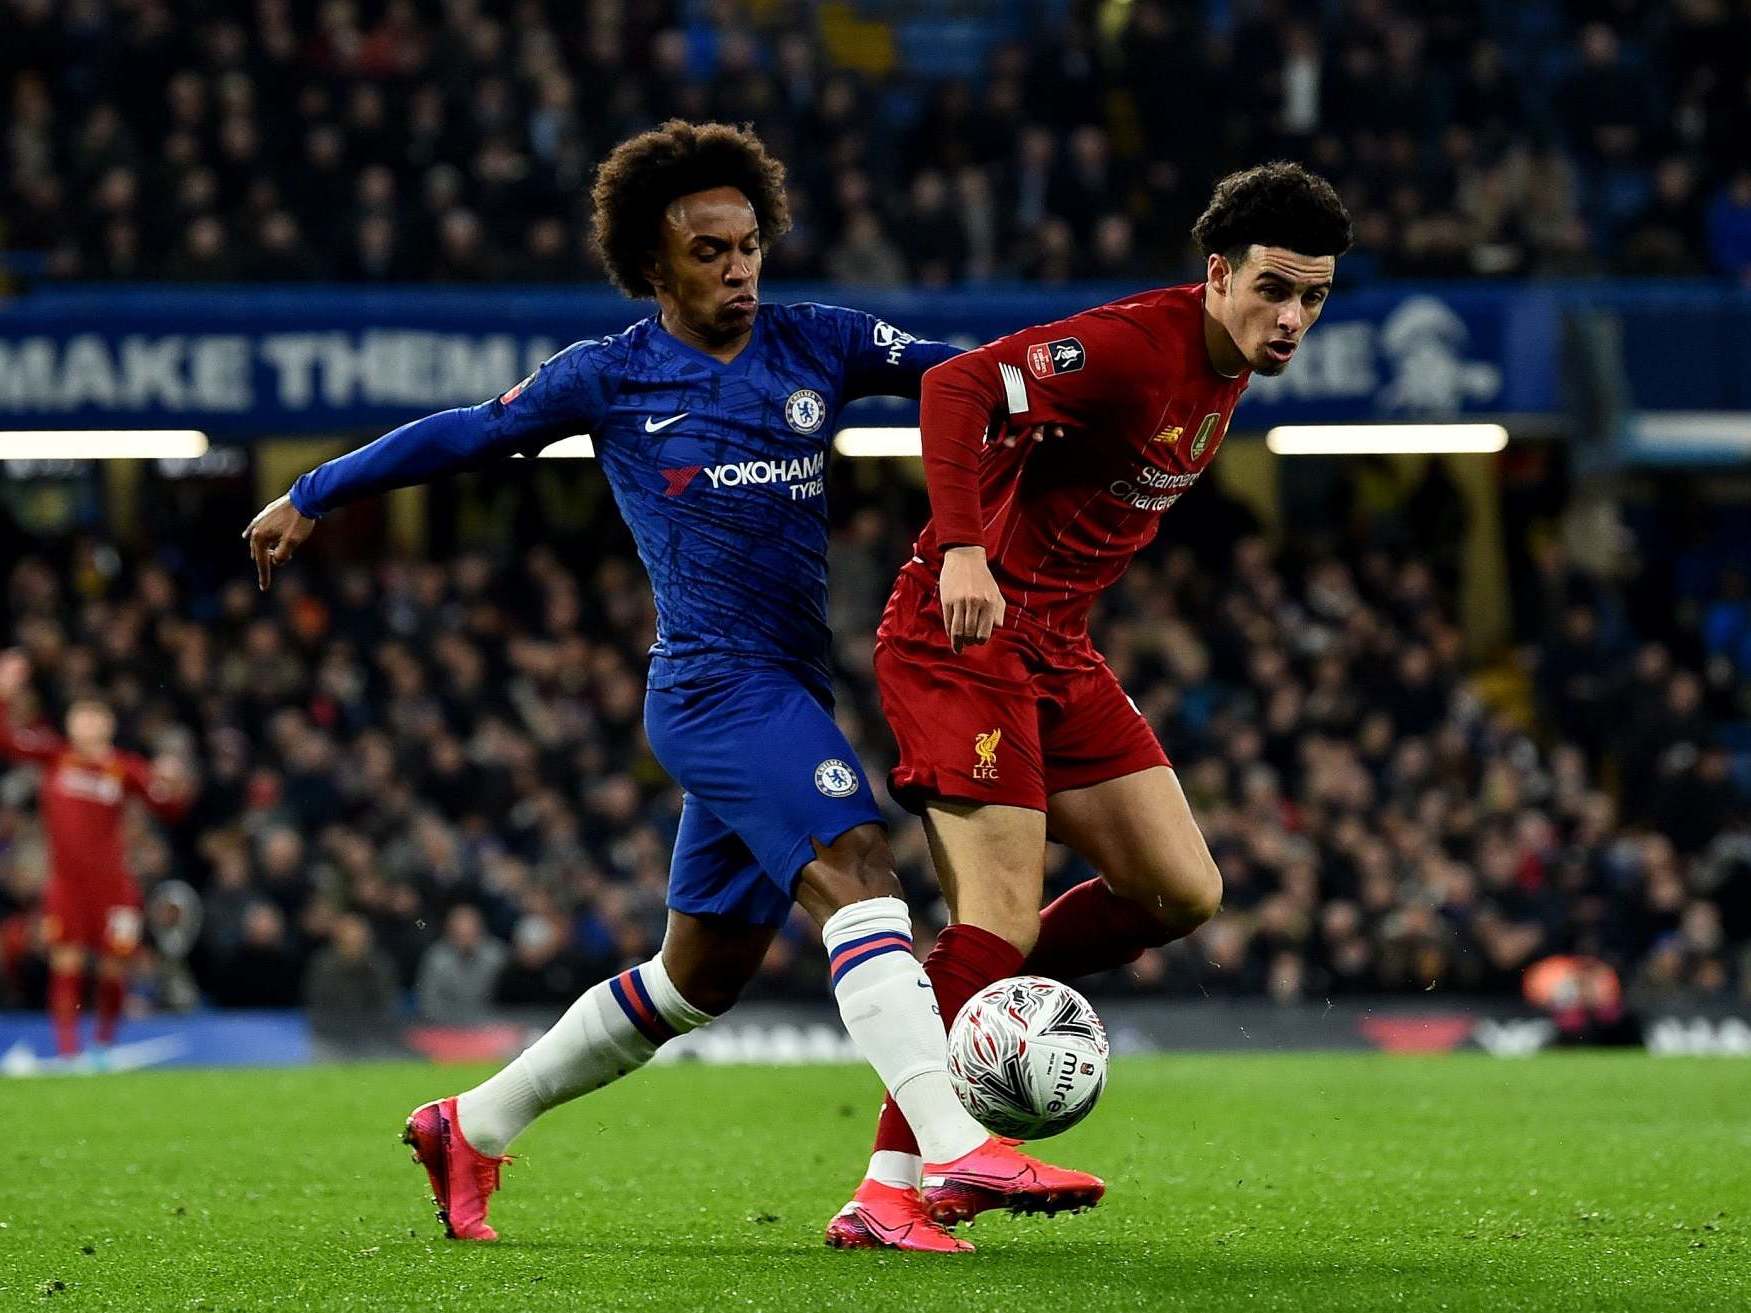 Willian (left) battles for the ball with Liverpool's Curtis Jones